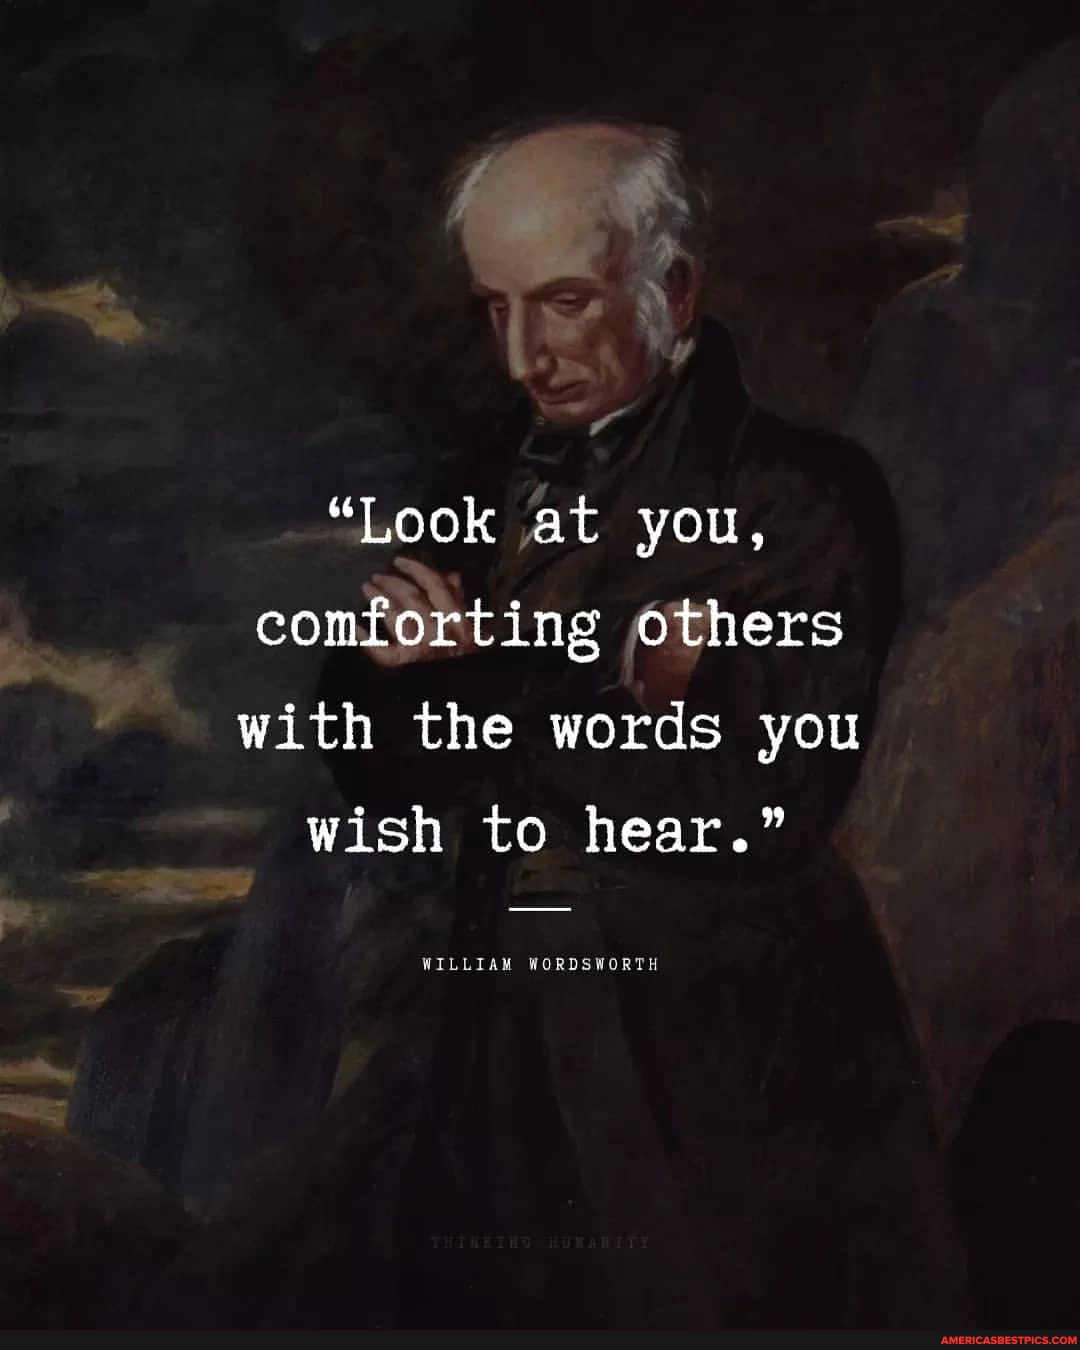 "Look at you, comforting others with the words you wish to hear." WILLIAM WORDSWORTH